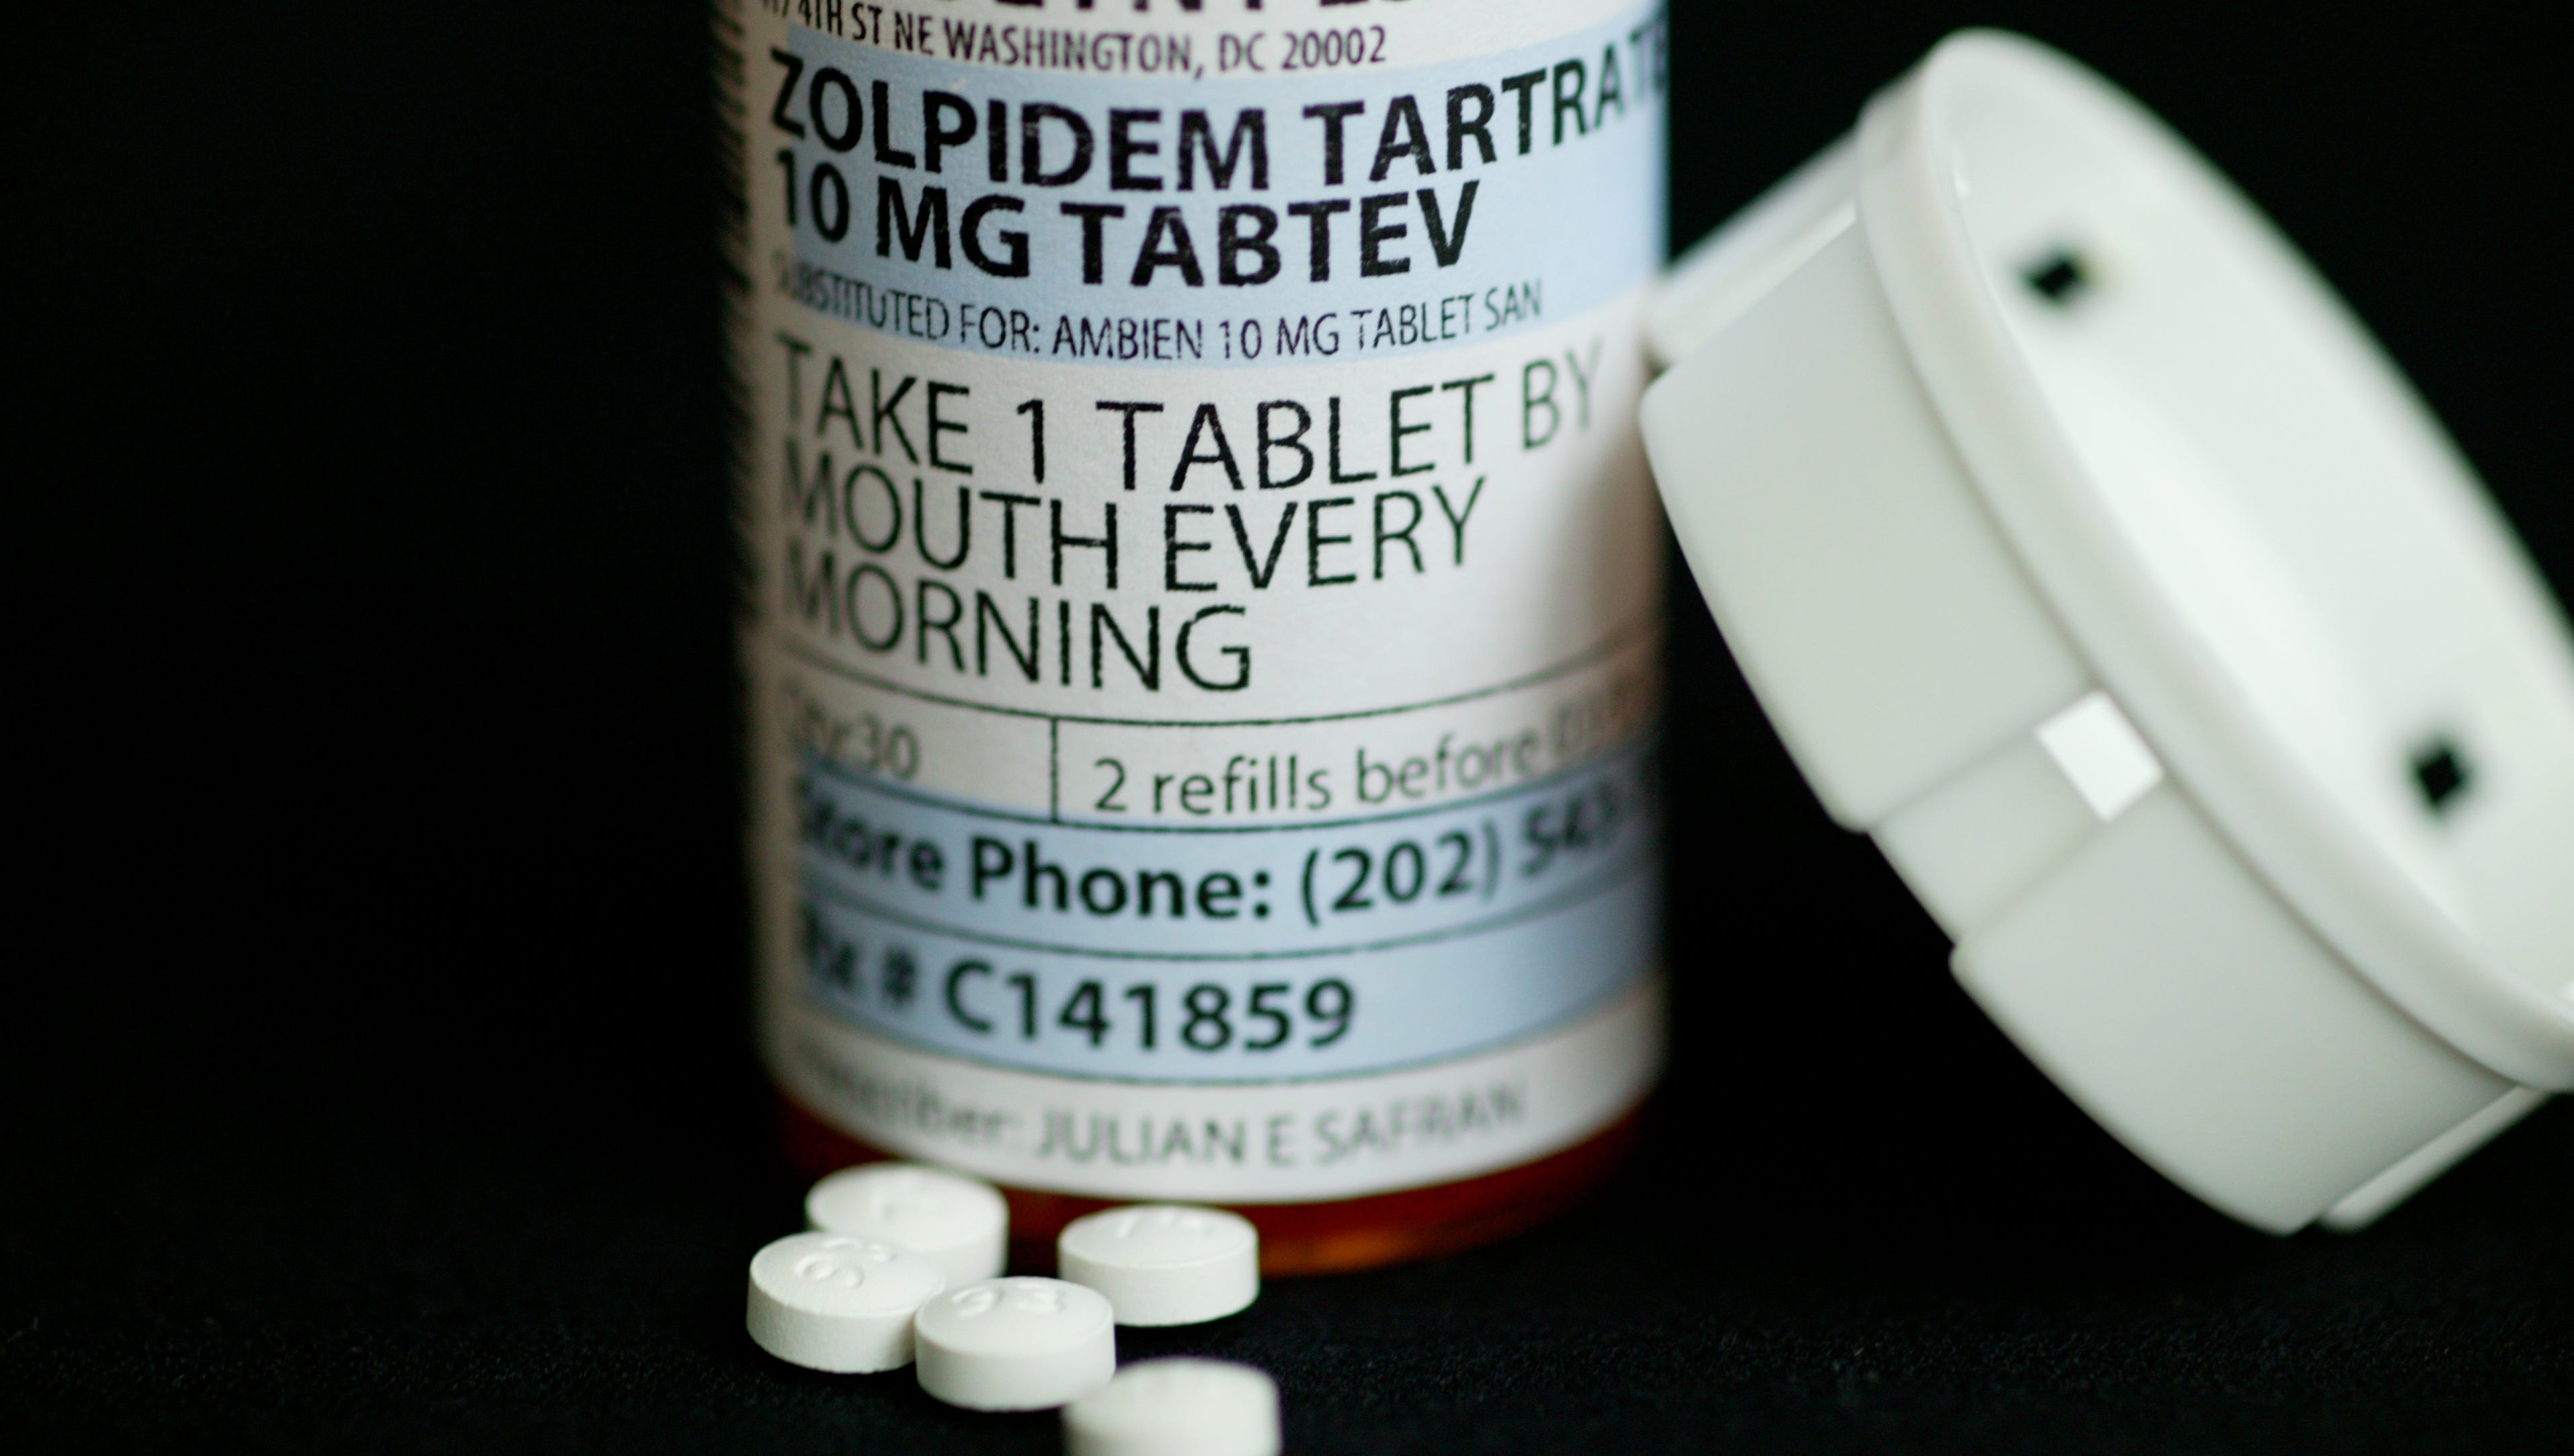 Dosage for coma patients zolpidem